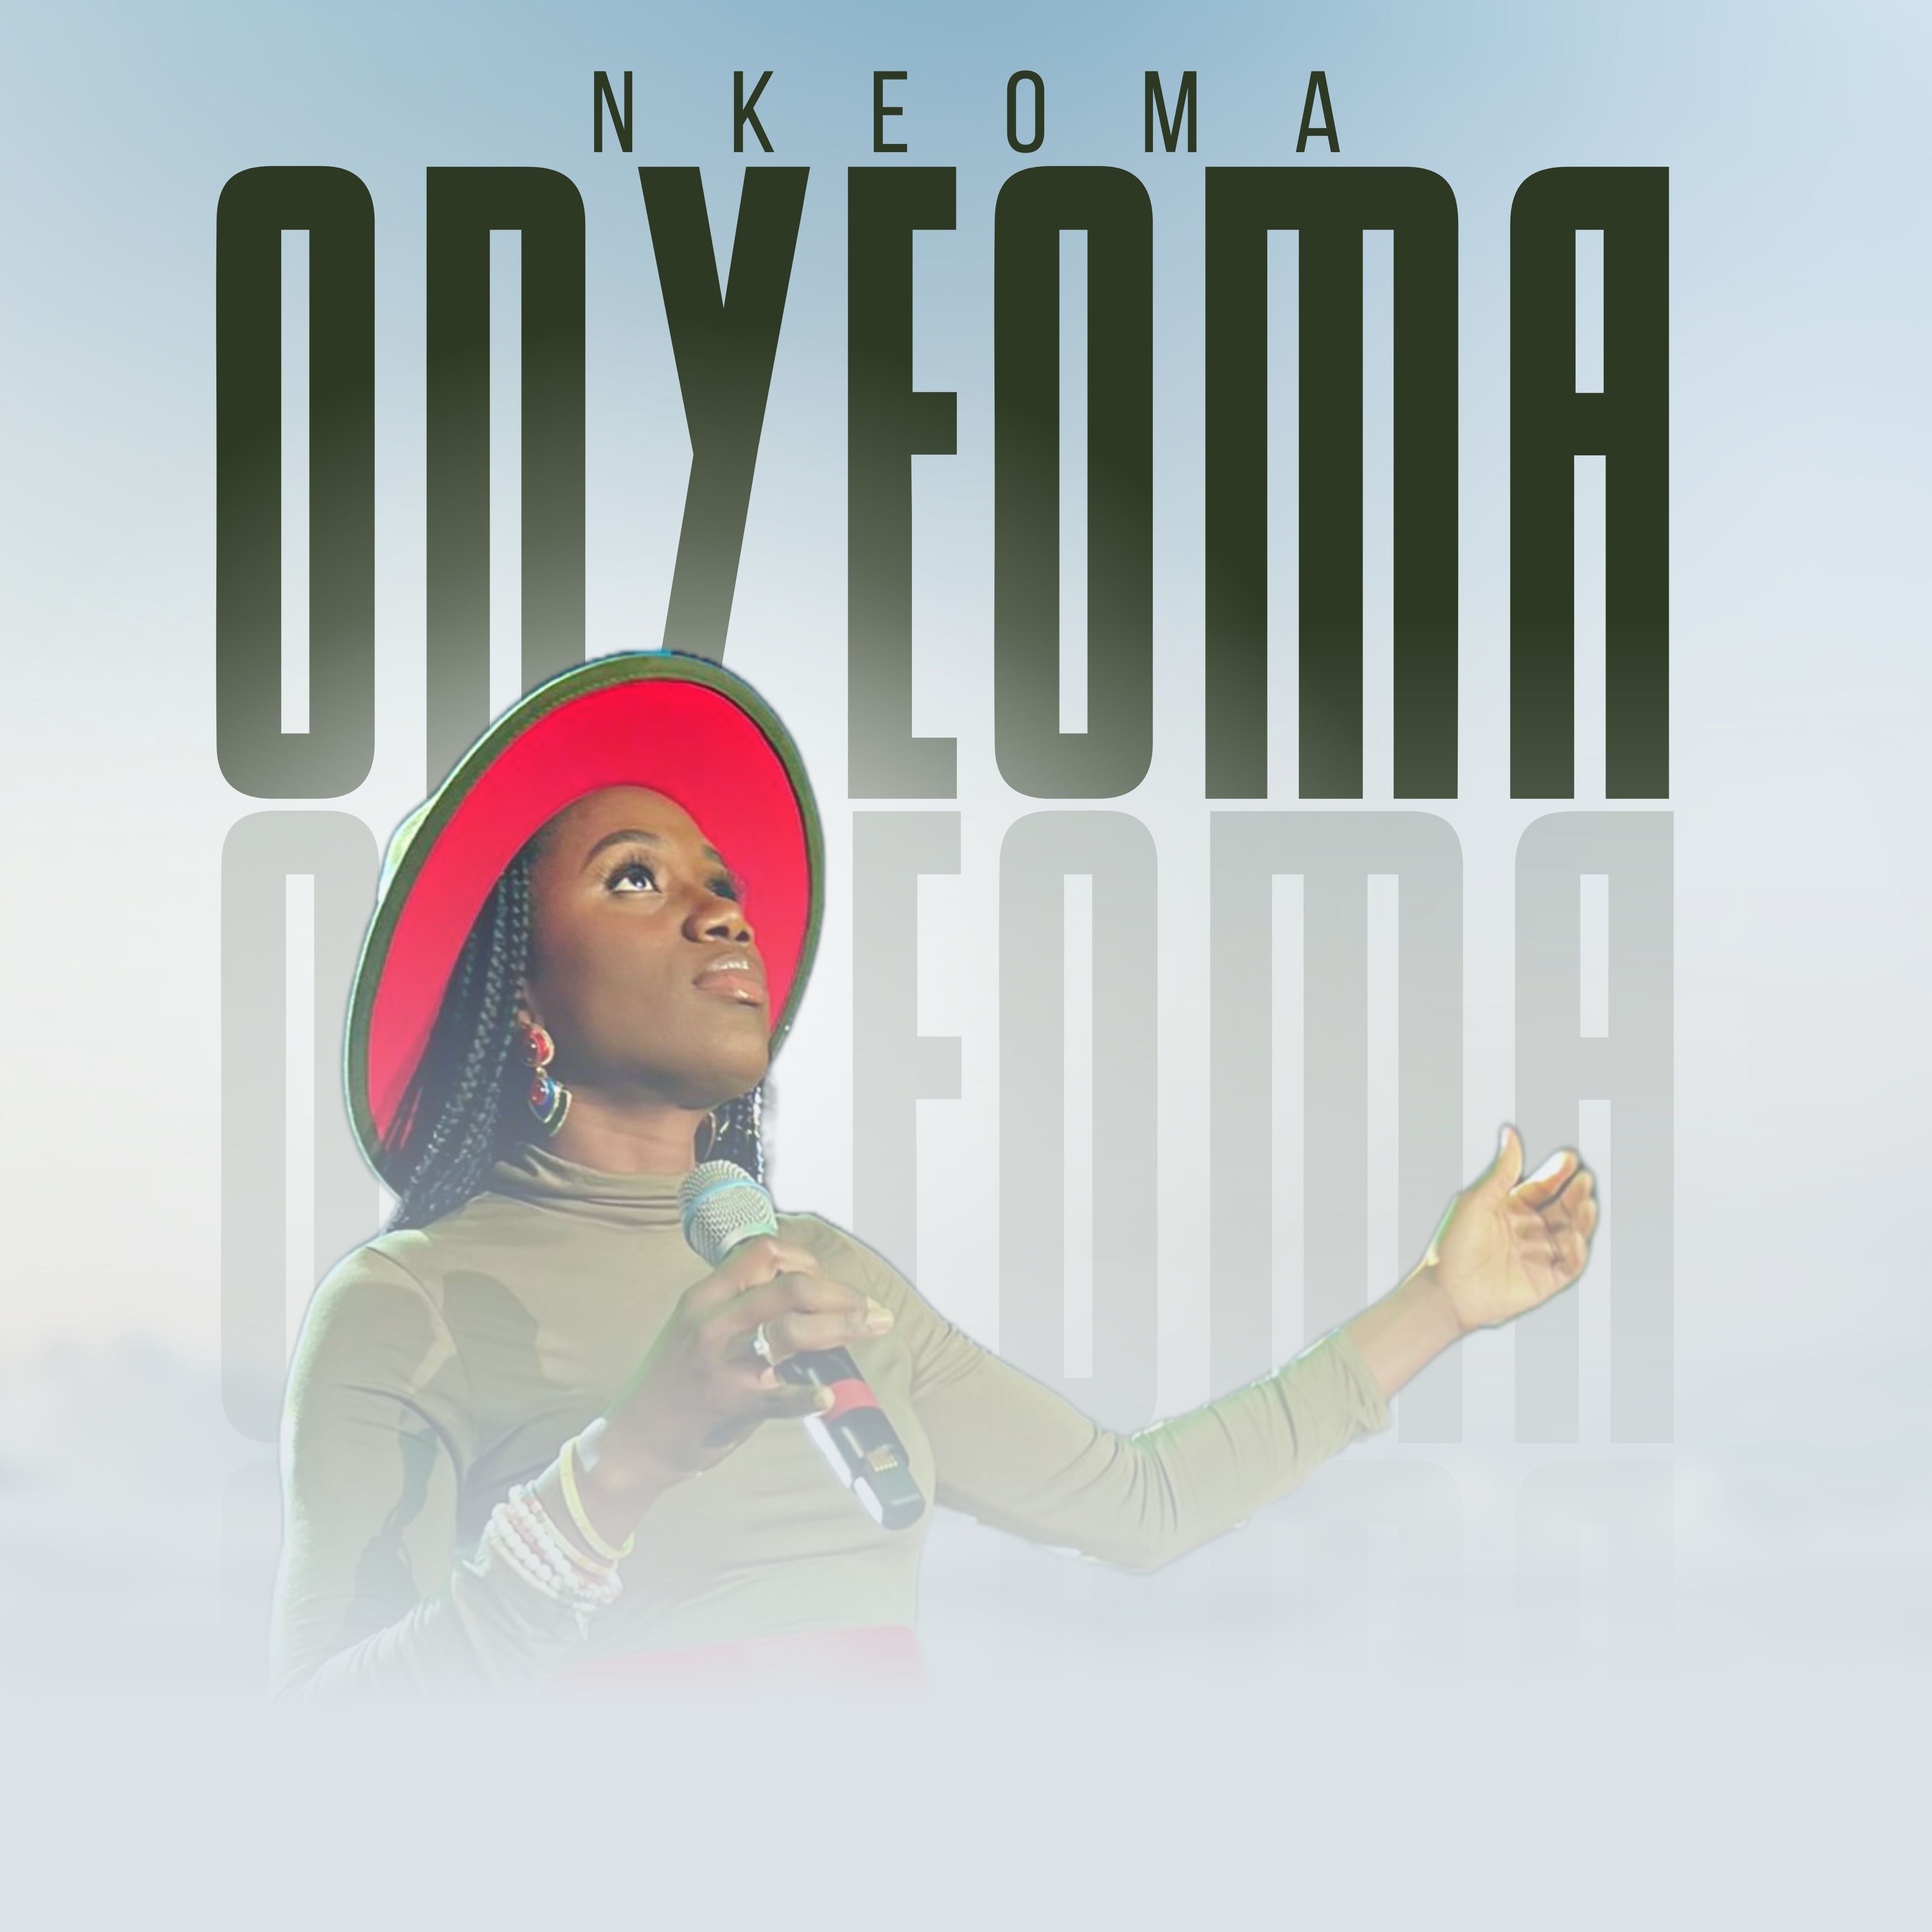 Nkeoma Wraps up the year in grand style with a new song titled Onyeoma